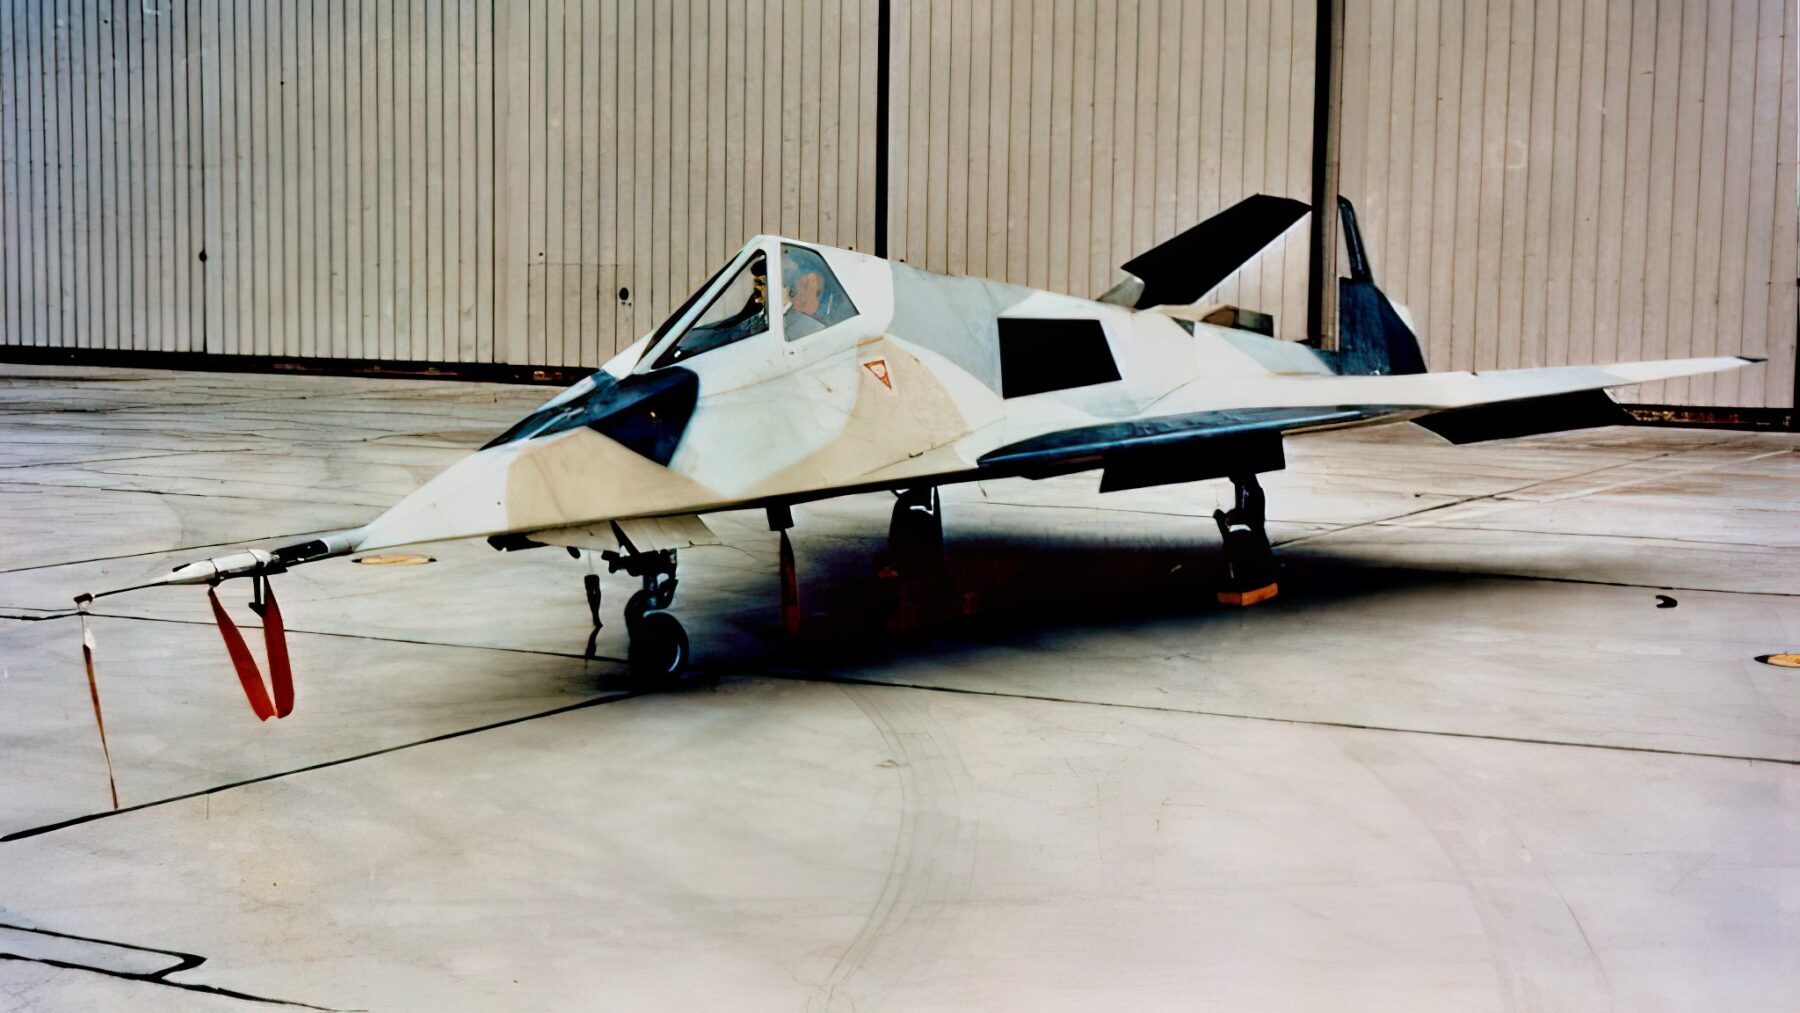 US Air Force photo to the DARPA / Lockheed Martin Have Blue prototype